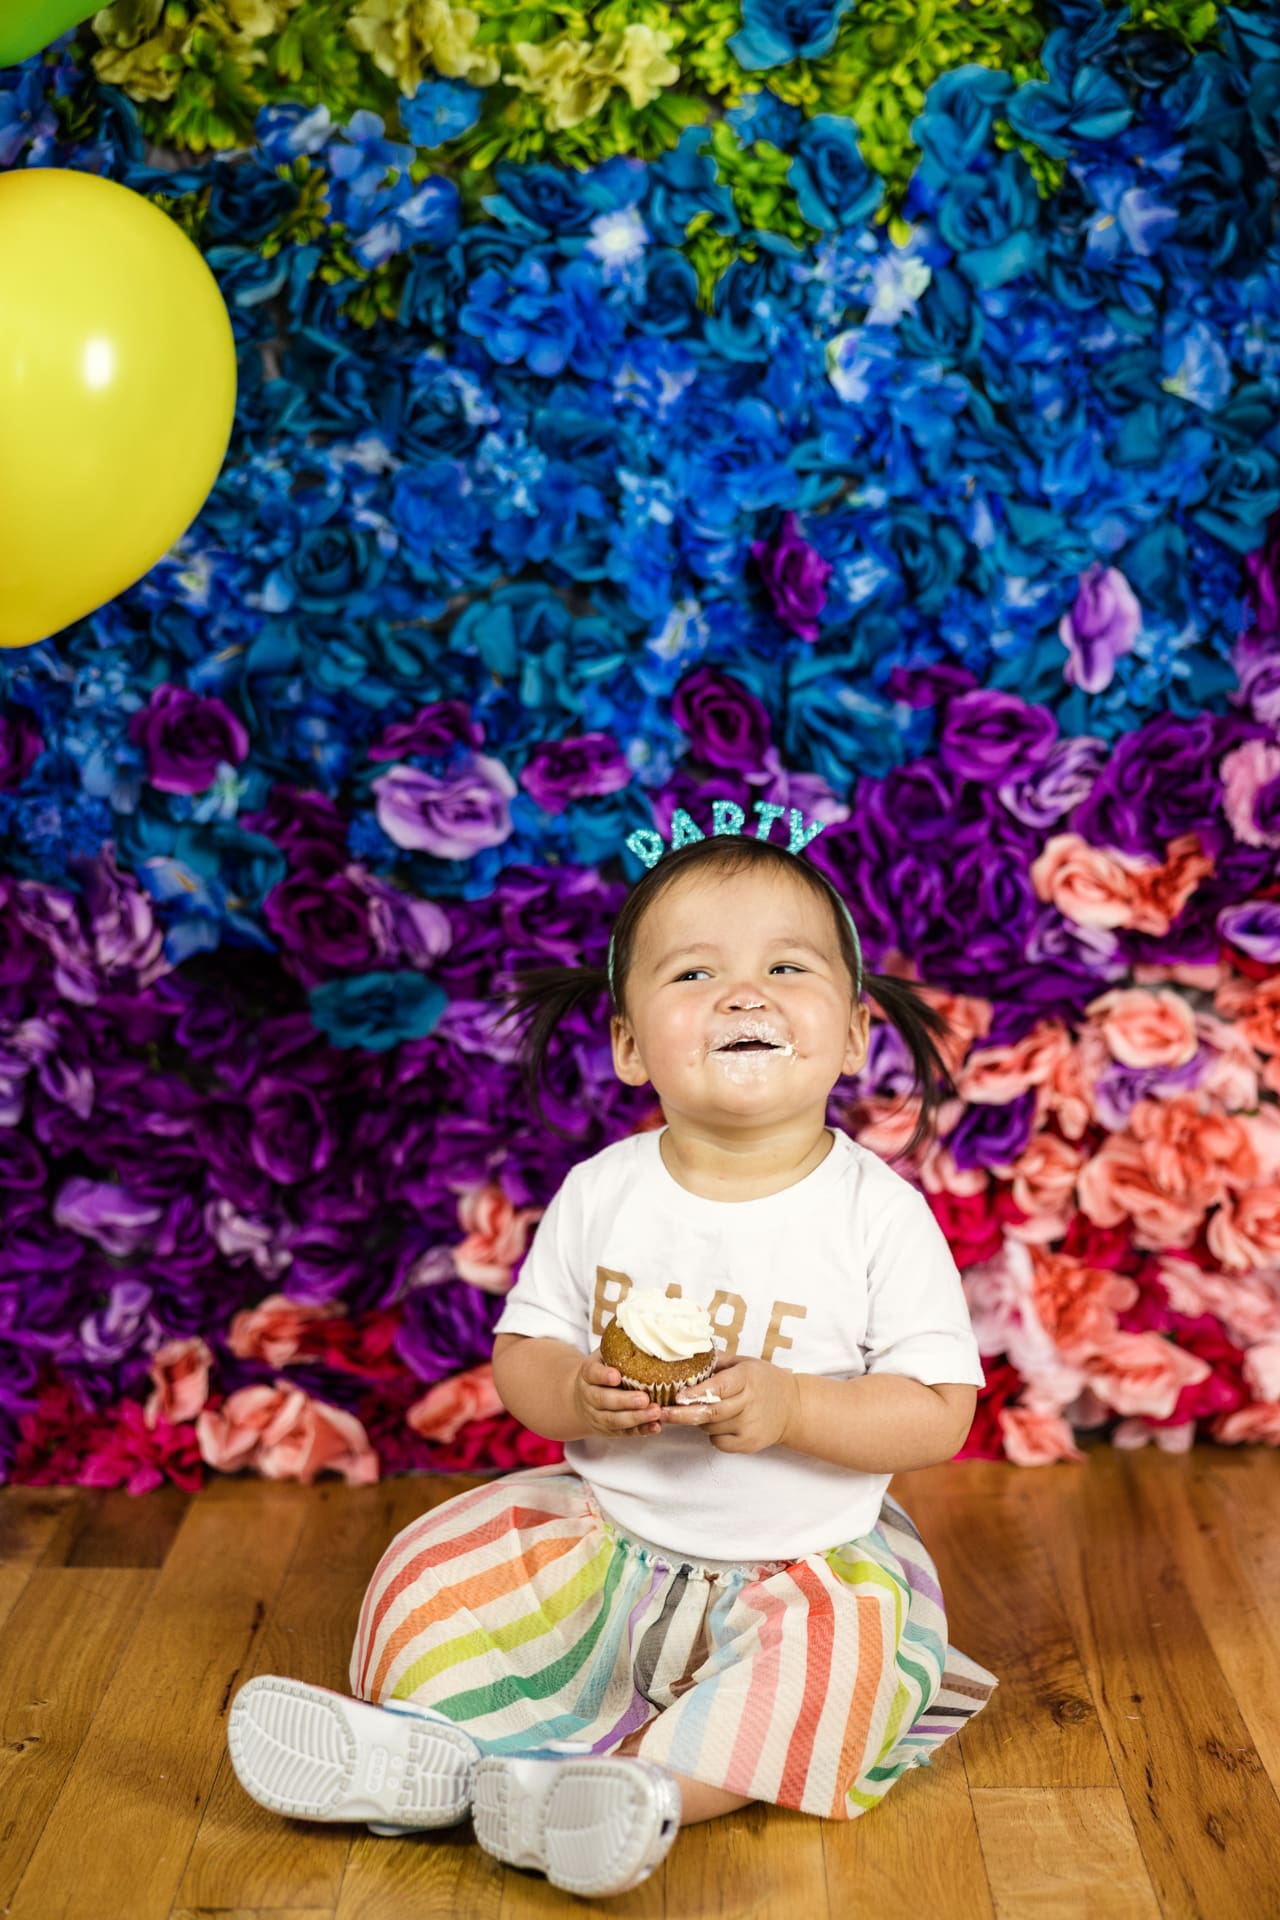 Candid photo of happy toddler eating cupcake in front of rainbow flower wall during birthday party photoshoot at Chicago photography studio P&M Studio